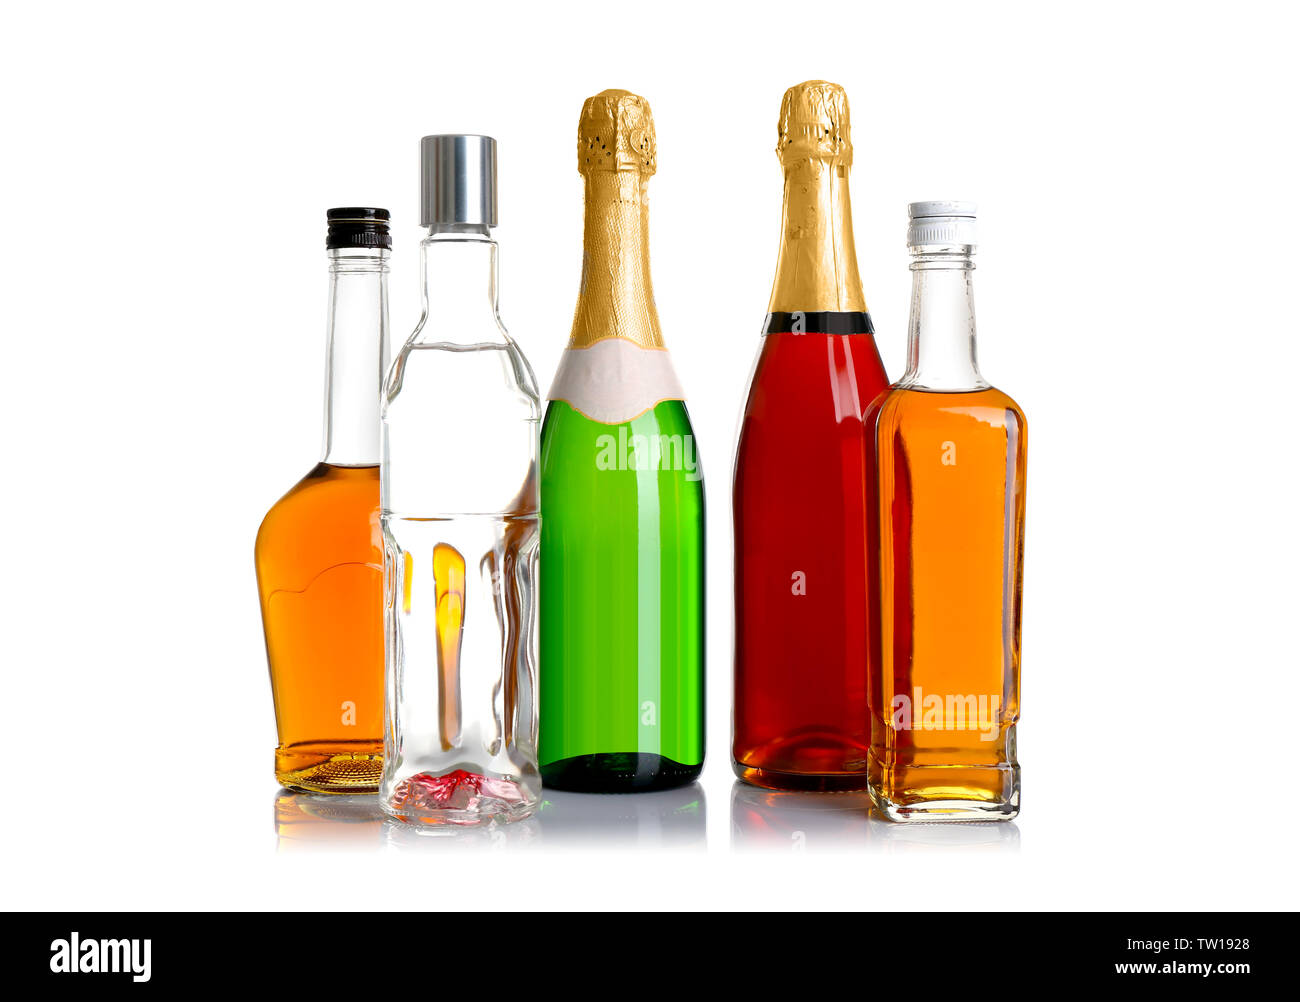 Different bottles of wine and spirits on white background Stock Photo